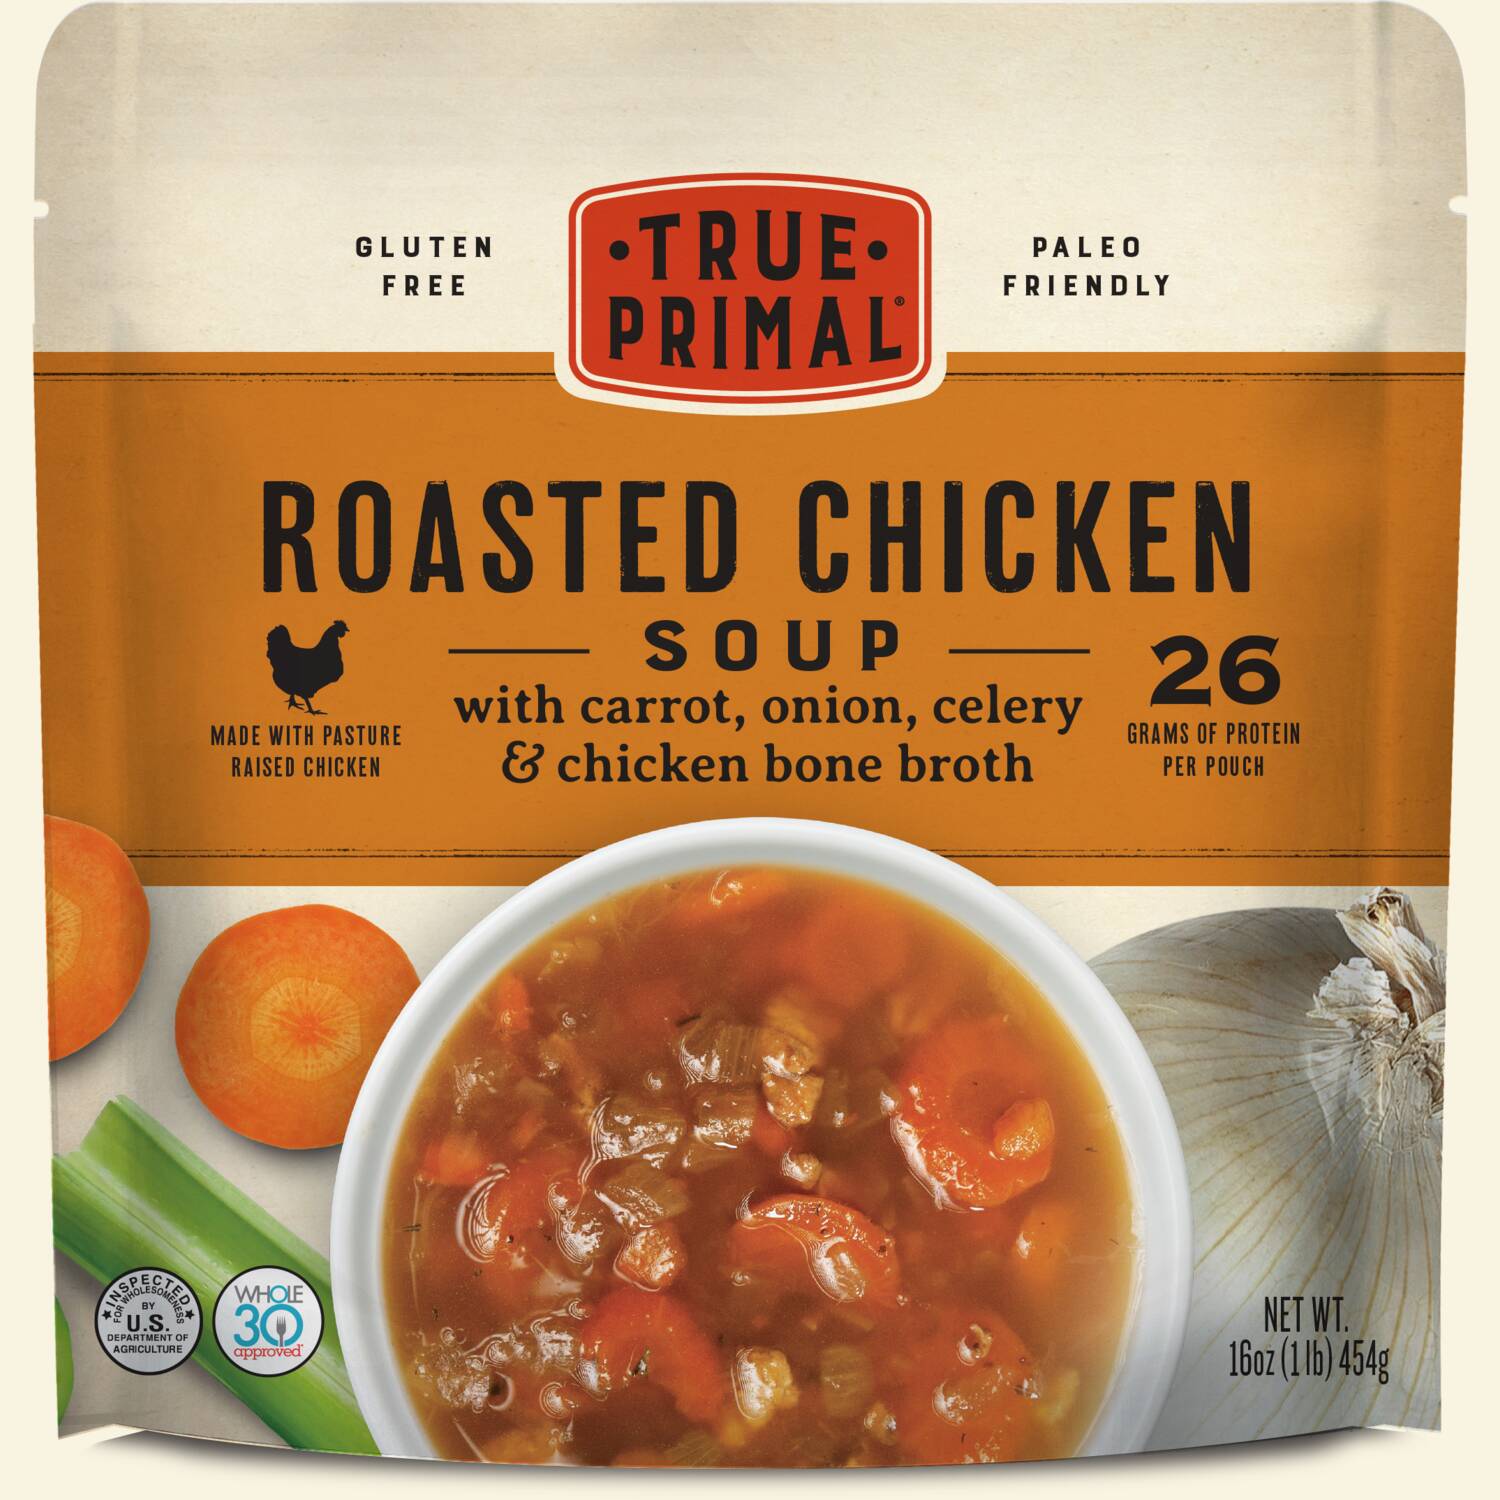 True Primal Roasted Chicken Soup in pouch, front